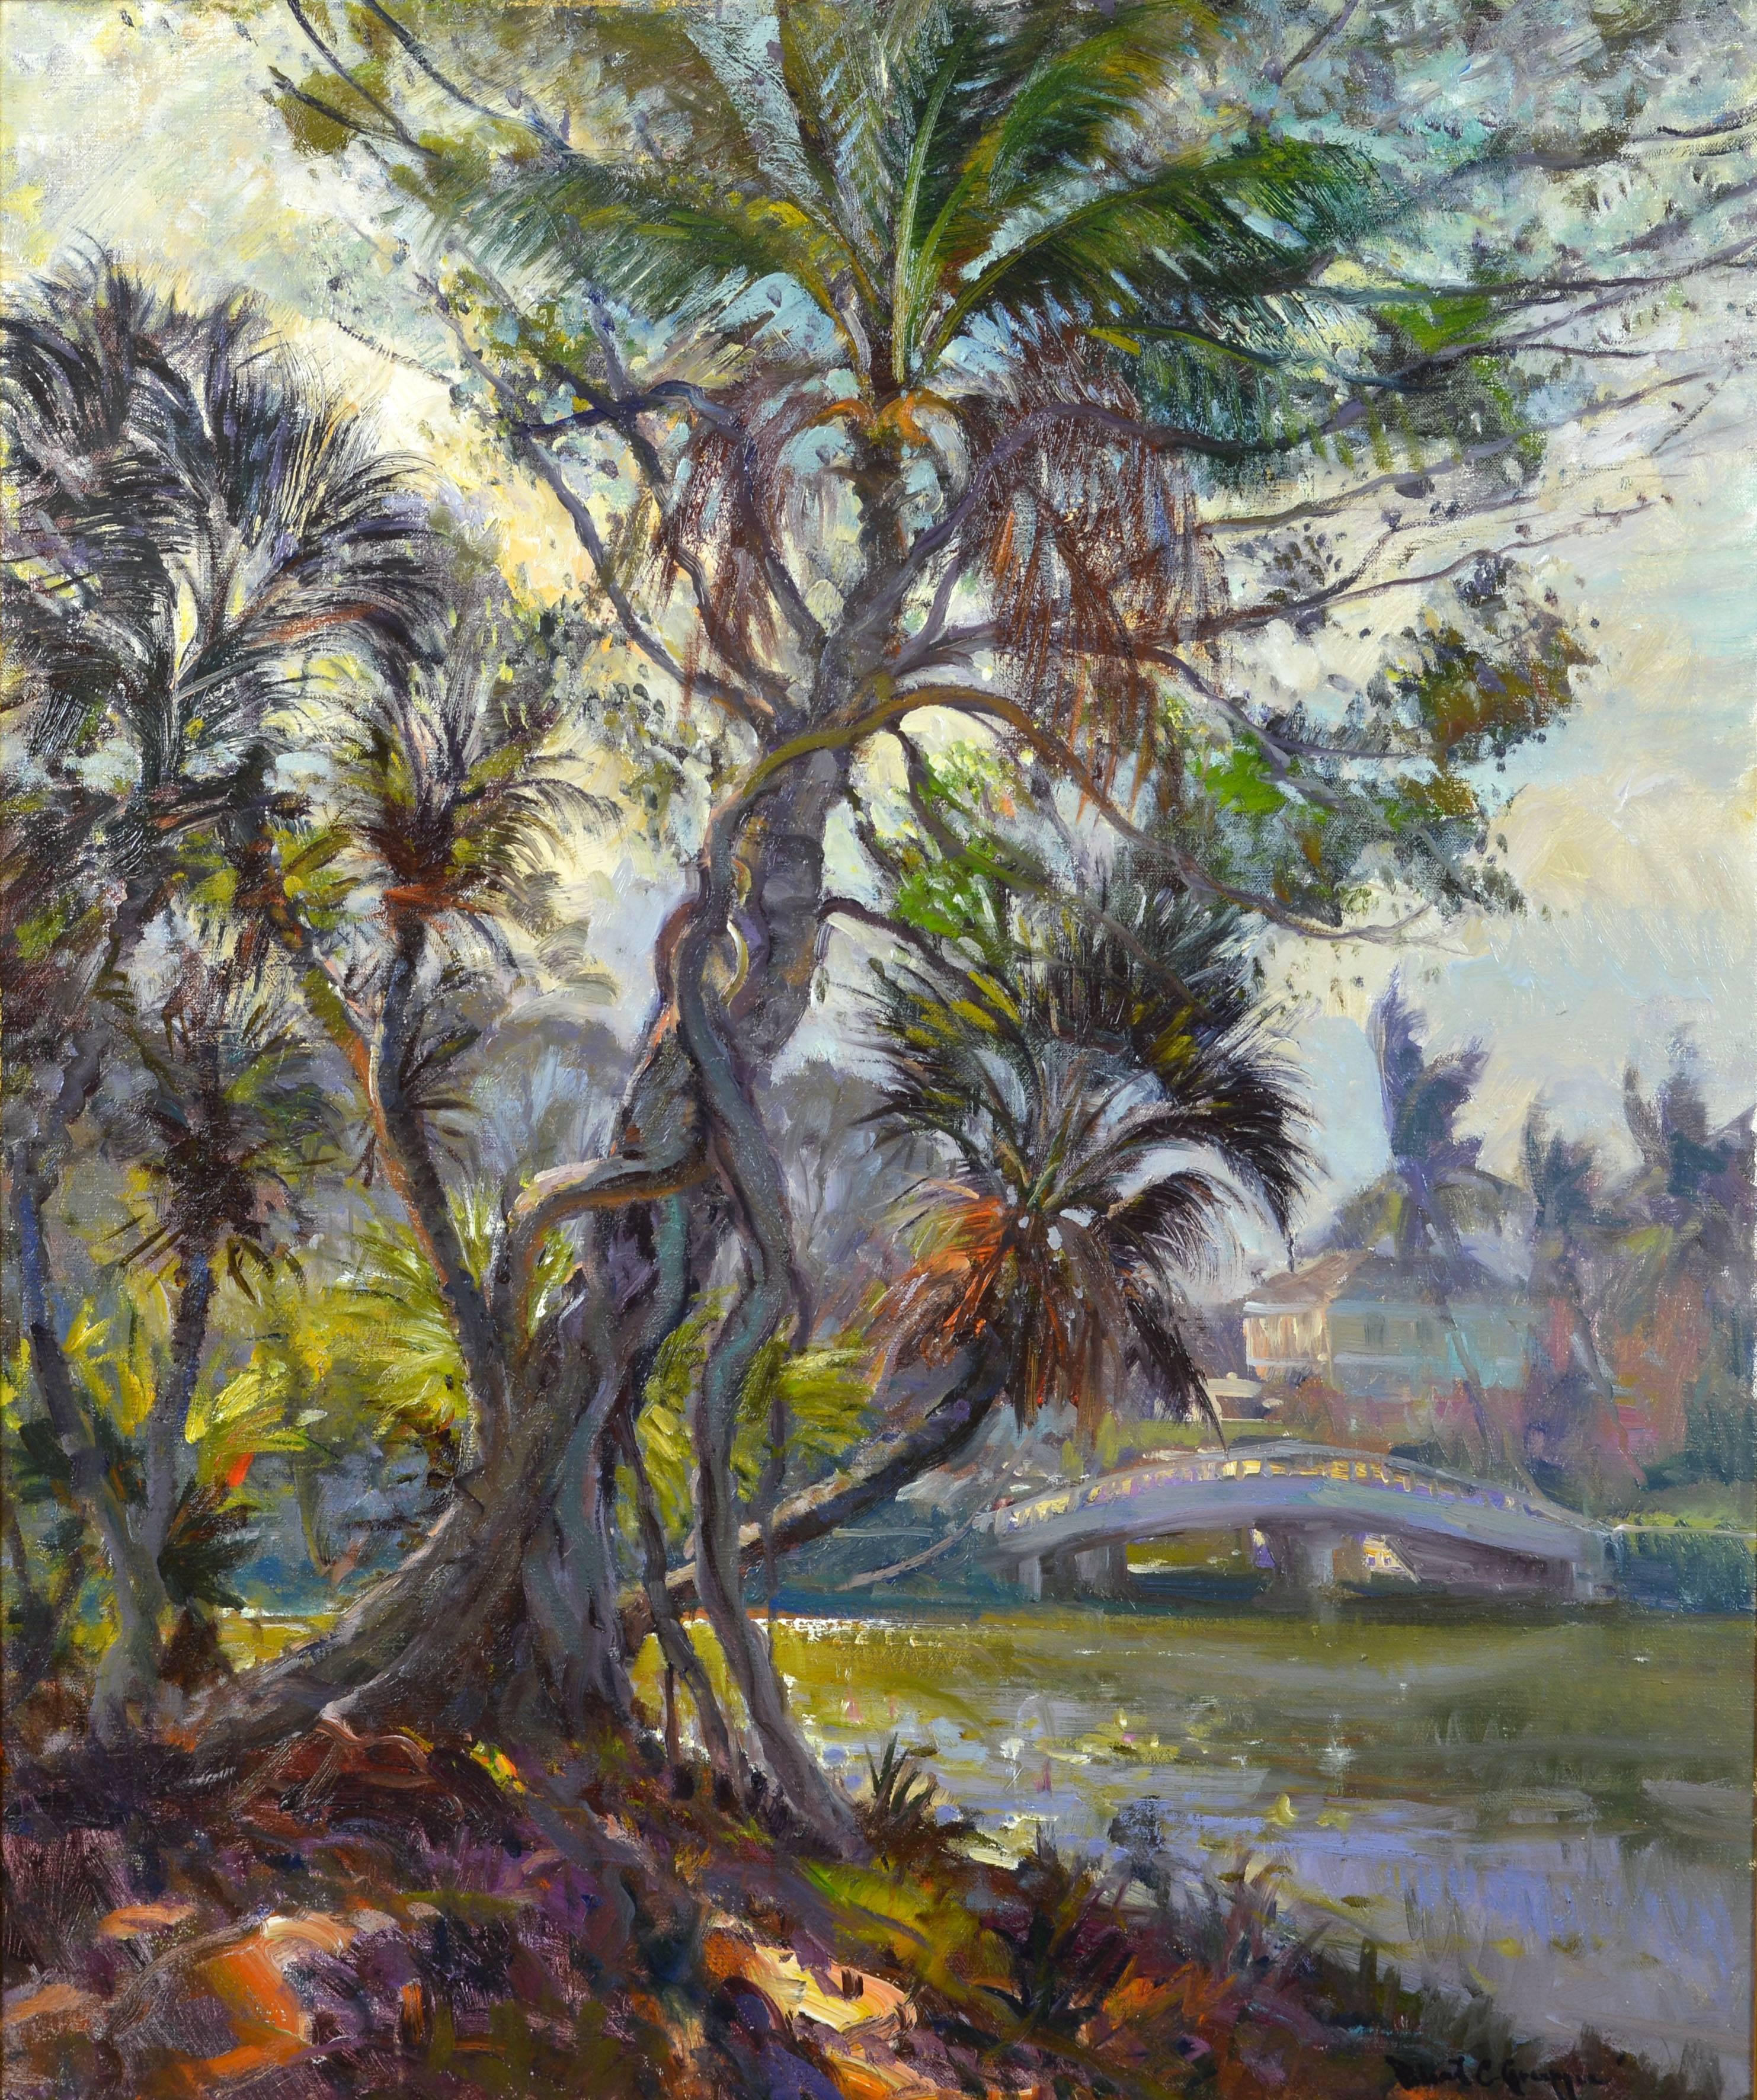 'Tropical Naples View'
By Robert C. Gruppe, American b. 1944.
Measures: 30 x 36 inches with frame, 42 x 48 inches including frame.
Oil on canvas, signed.
Housed in a custom-made vintage frame.

Robert Charles Gruppe:
Being third generation of